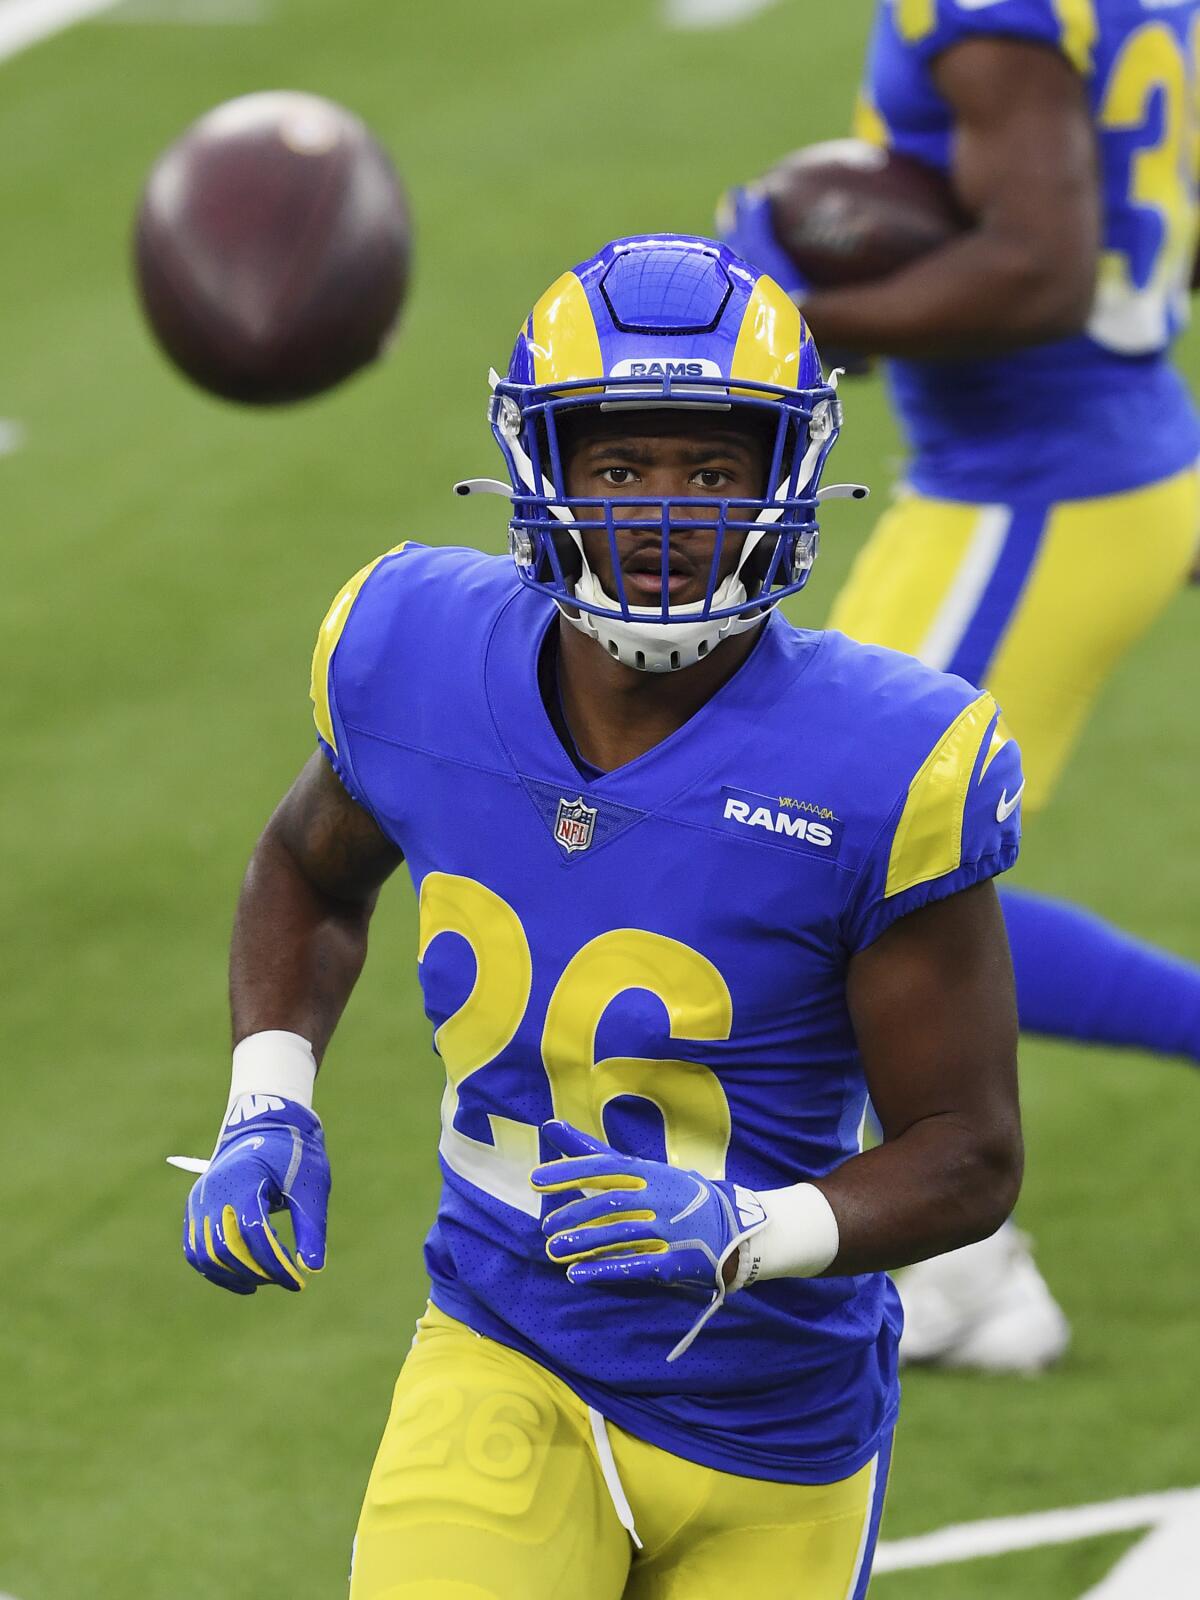 LA Rams throwback uniform: From worst place to first place